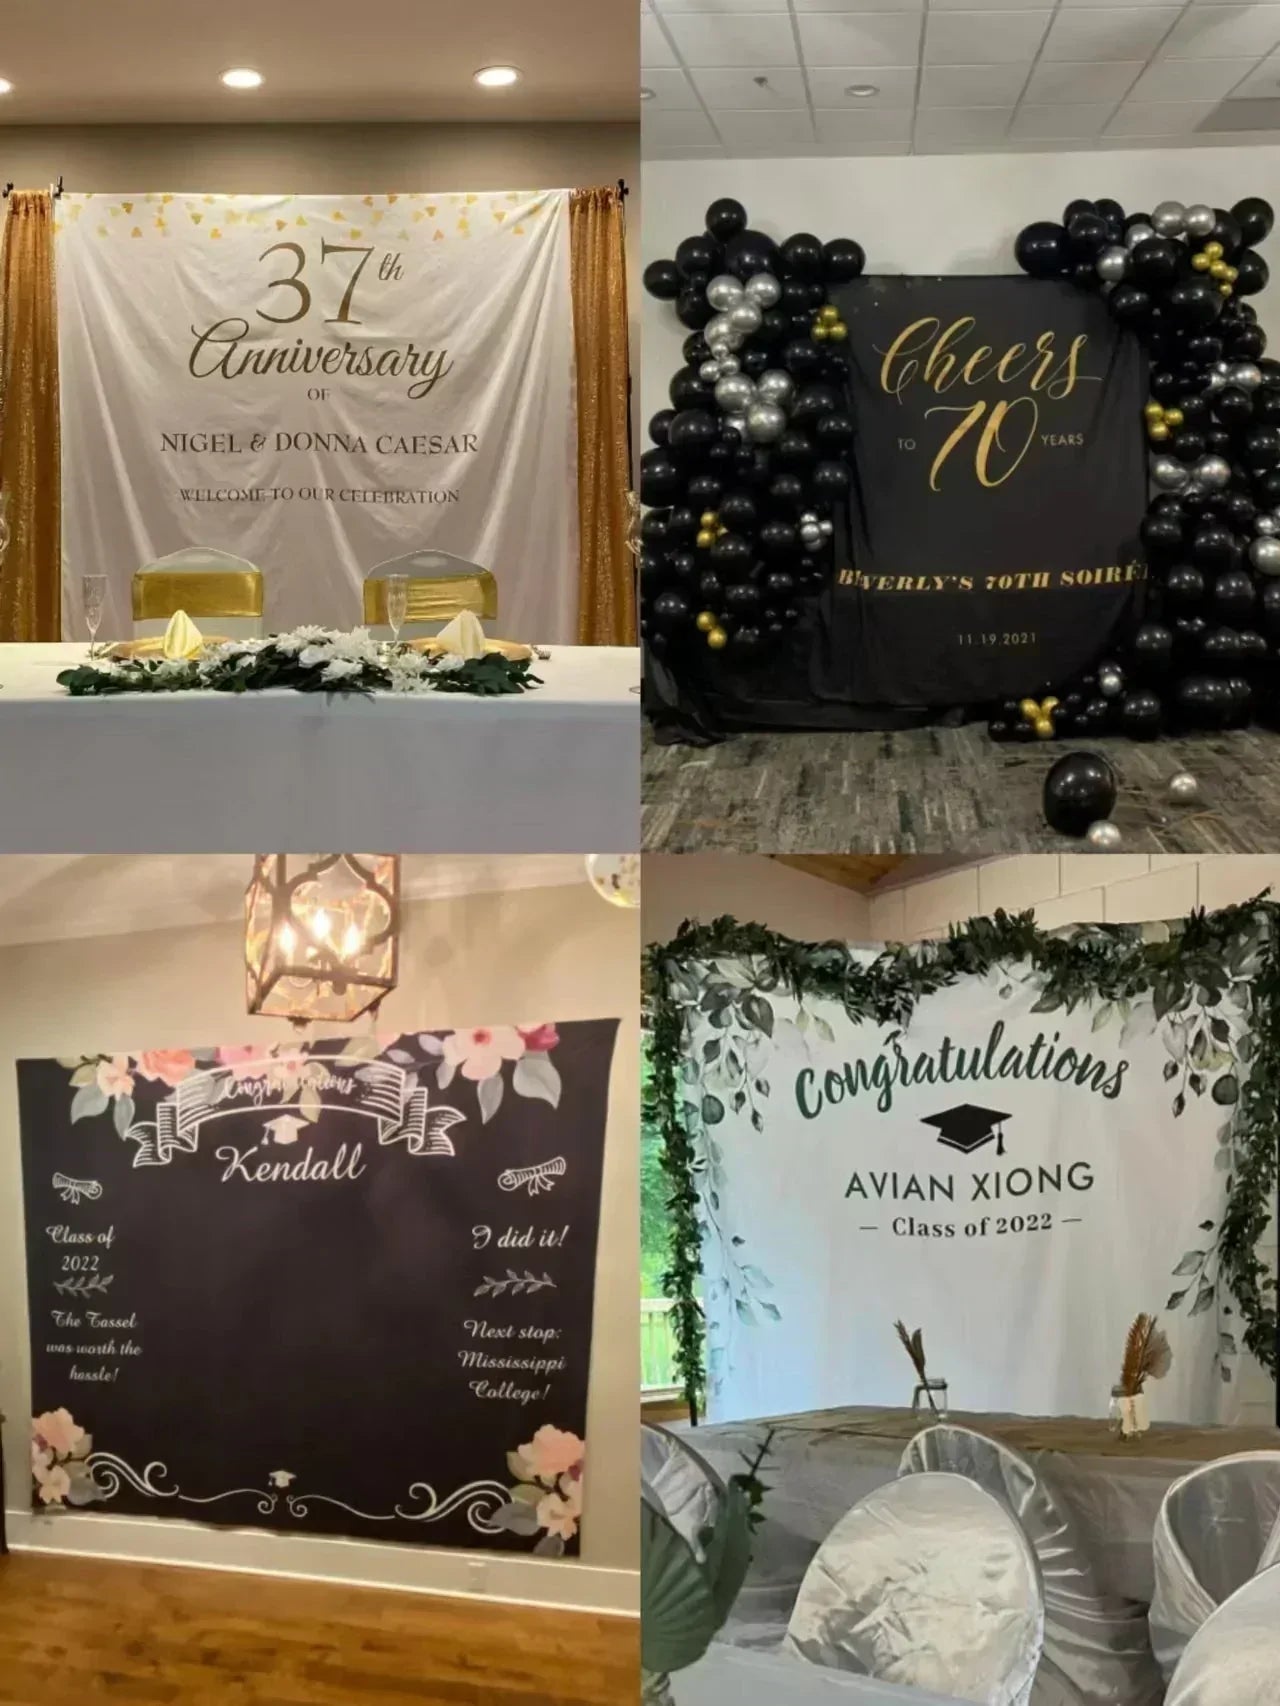 50th Black Adult Birthday Party Decoration Fabric Backdrop